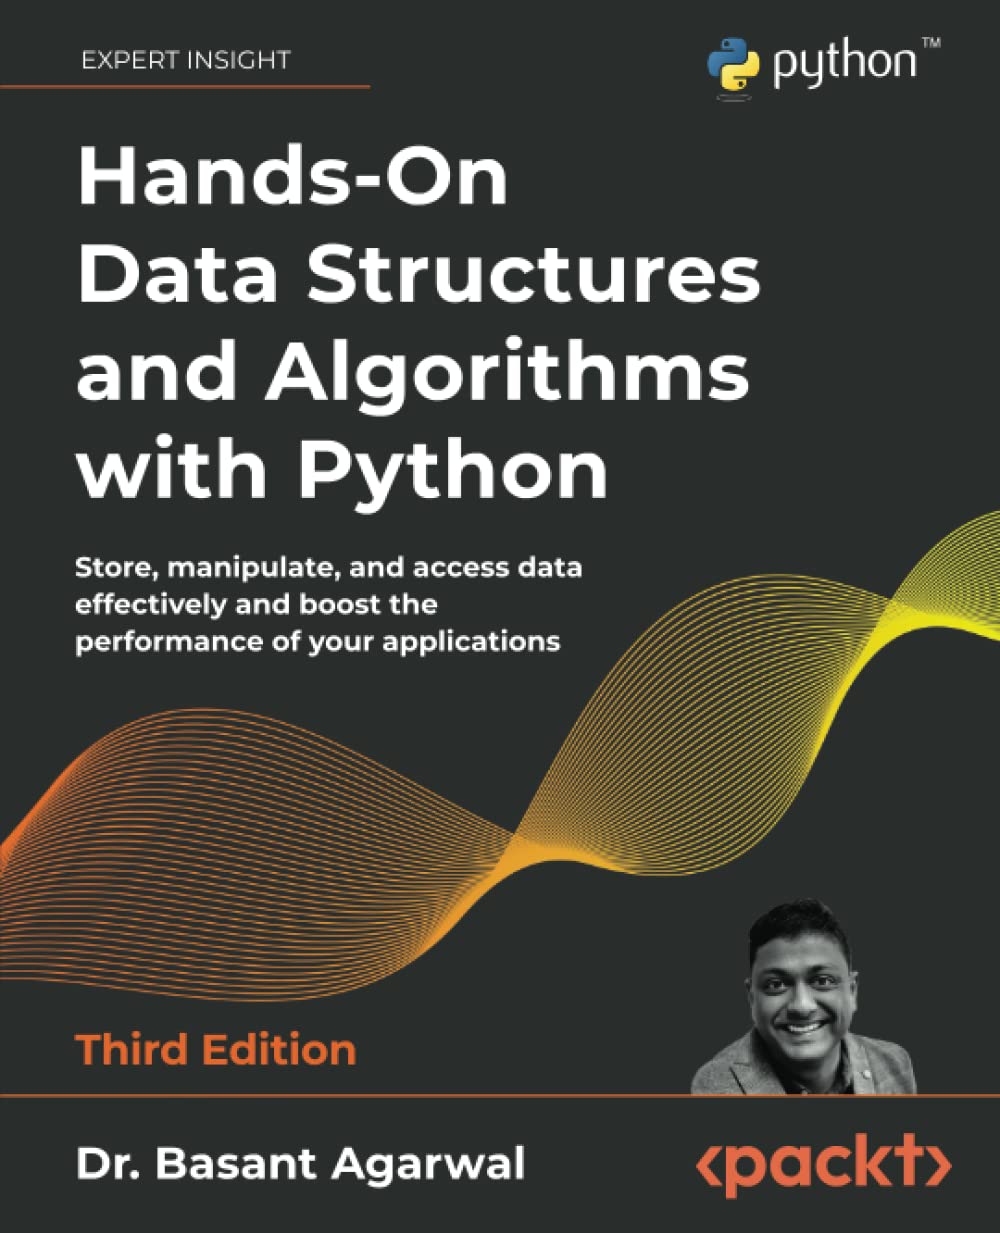 Hands-On Data Structures and Algorithms with Python: Store, manipulate, and access data effectively and boost the performance of your applications, 3rd Edition by  Dr. Basant Agarwal